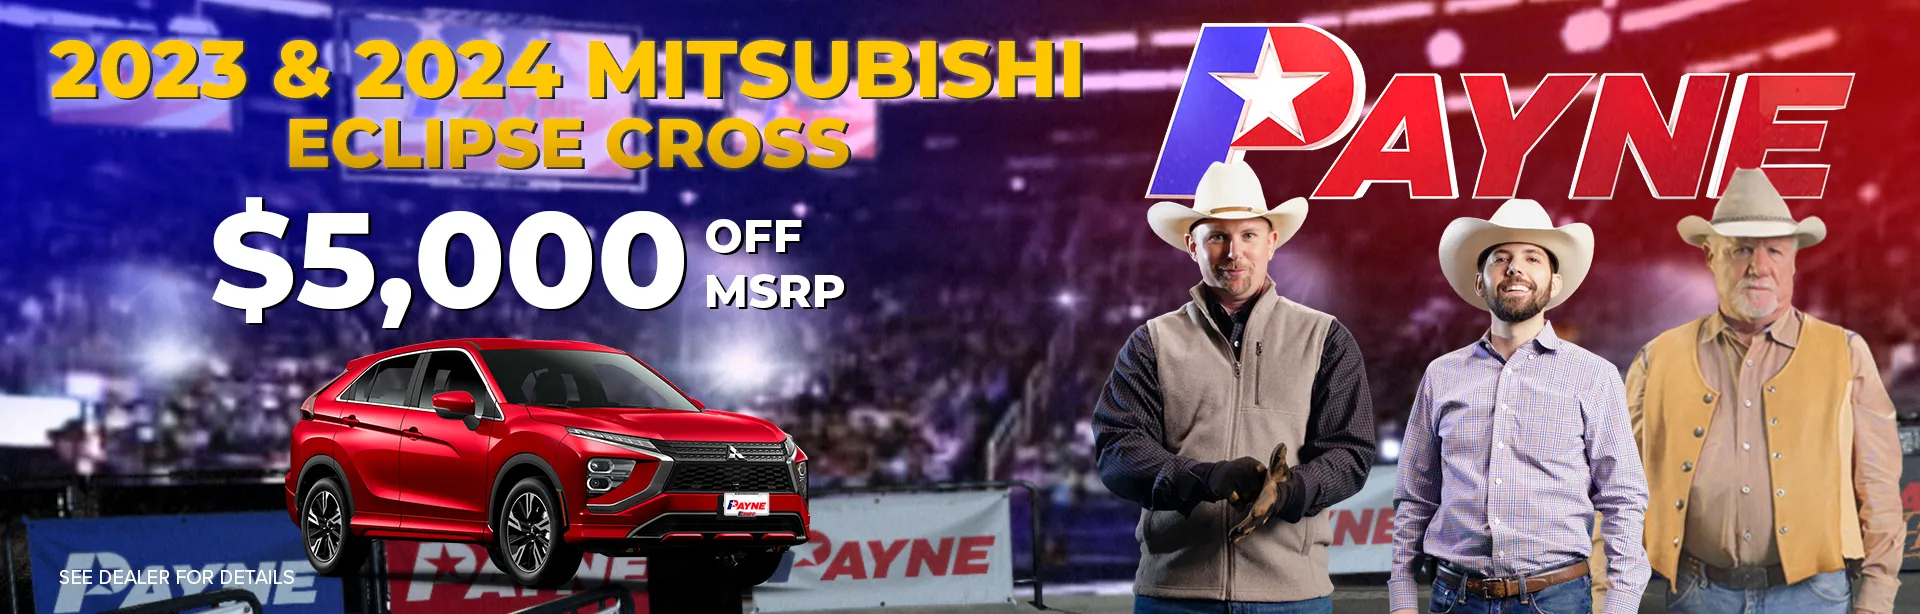 Get $5,000 off MSRP on a 2023 and 2024 Mitsubishi Eclispe Cross